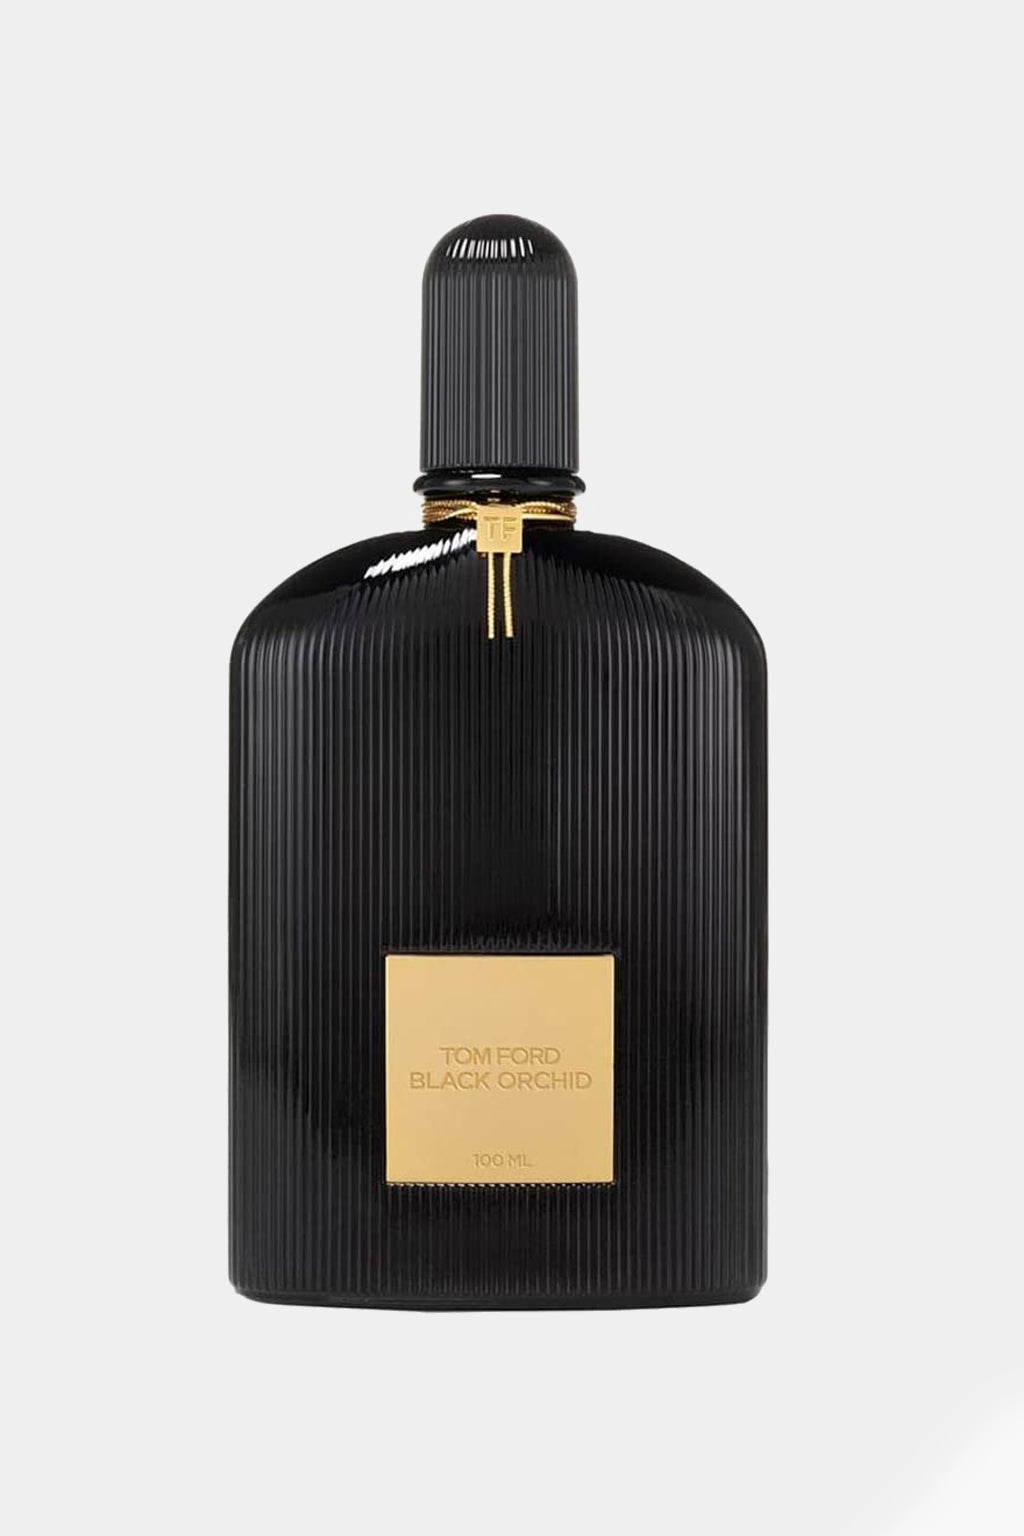 Tom Ford - Black Orchid Perfume